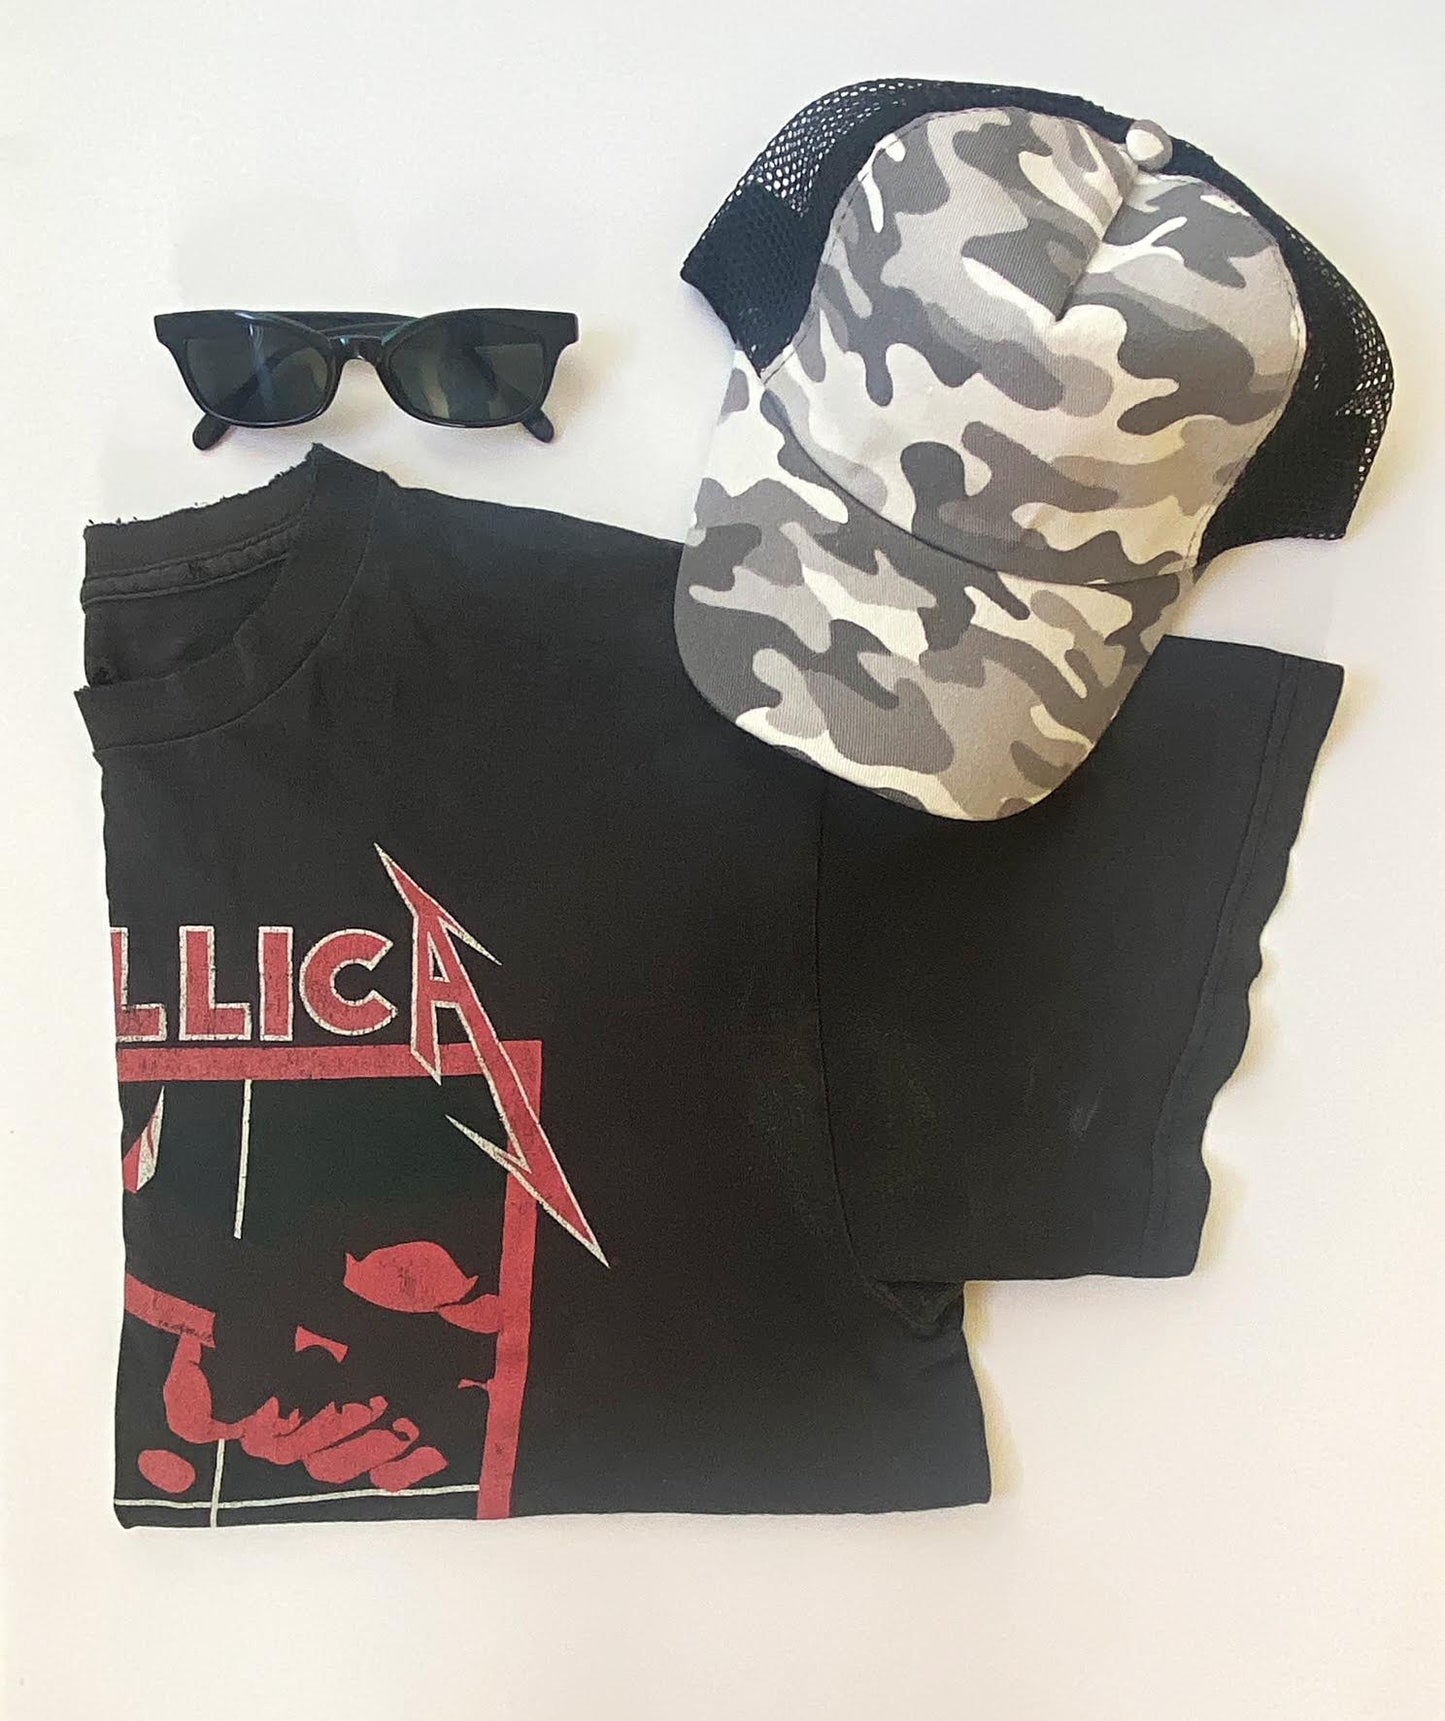 A display of items of clothing next to the gray camo design snapback hat